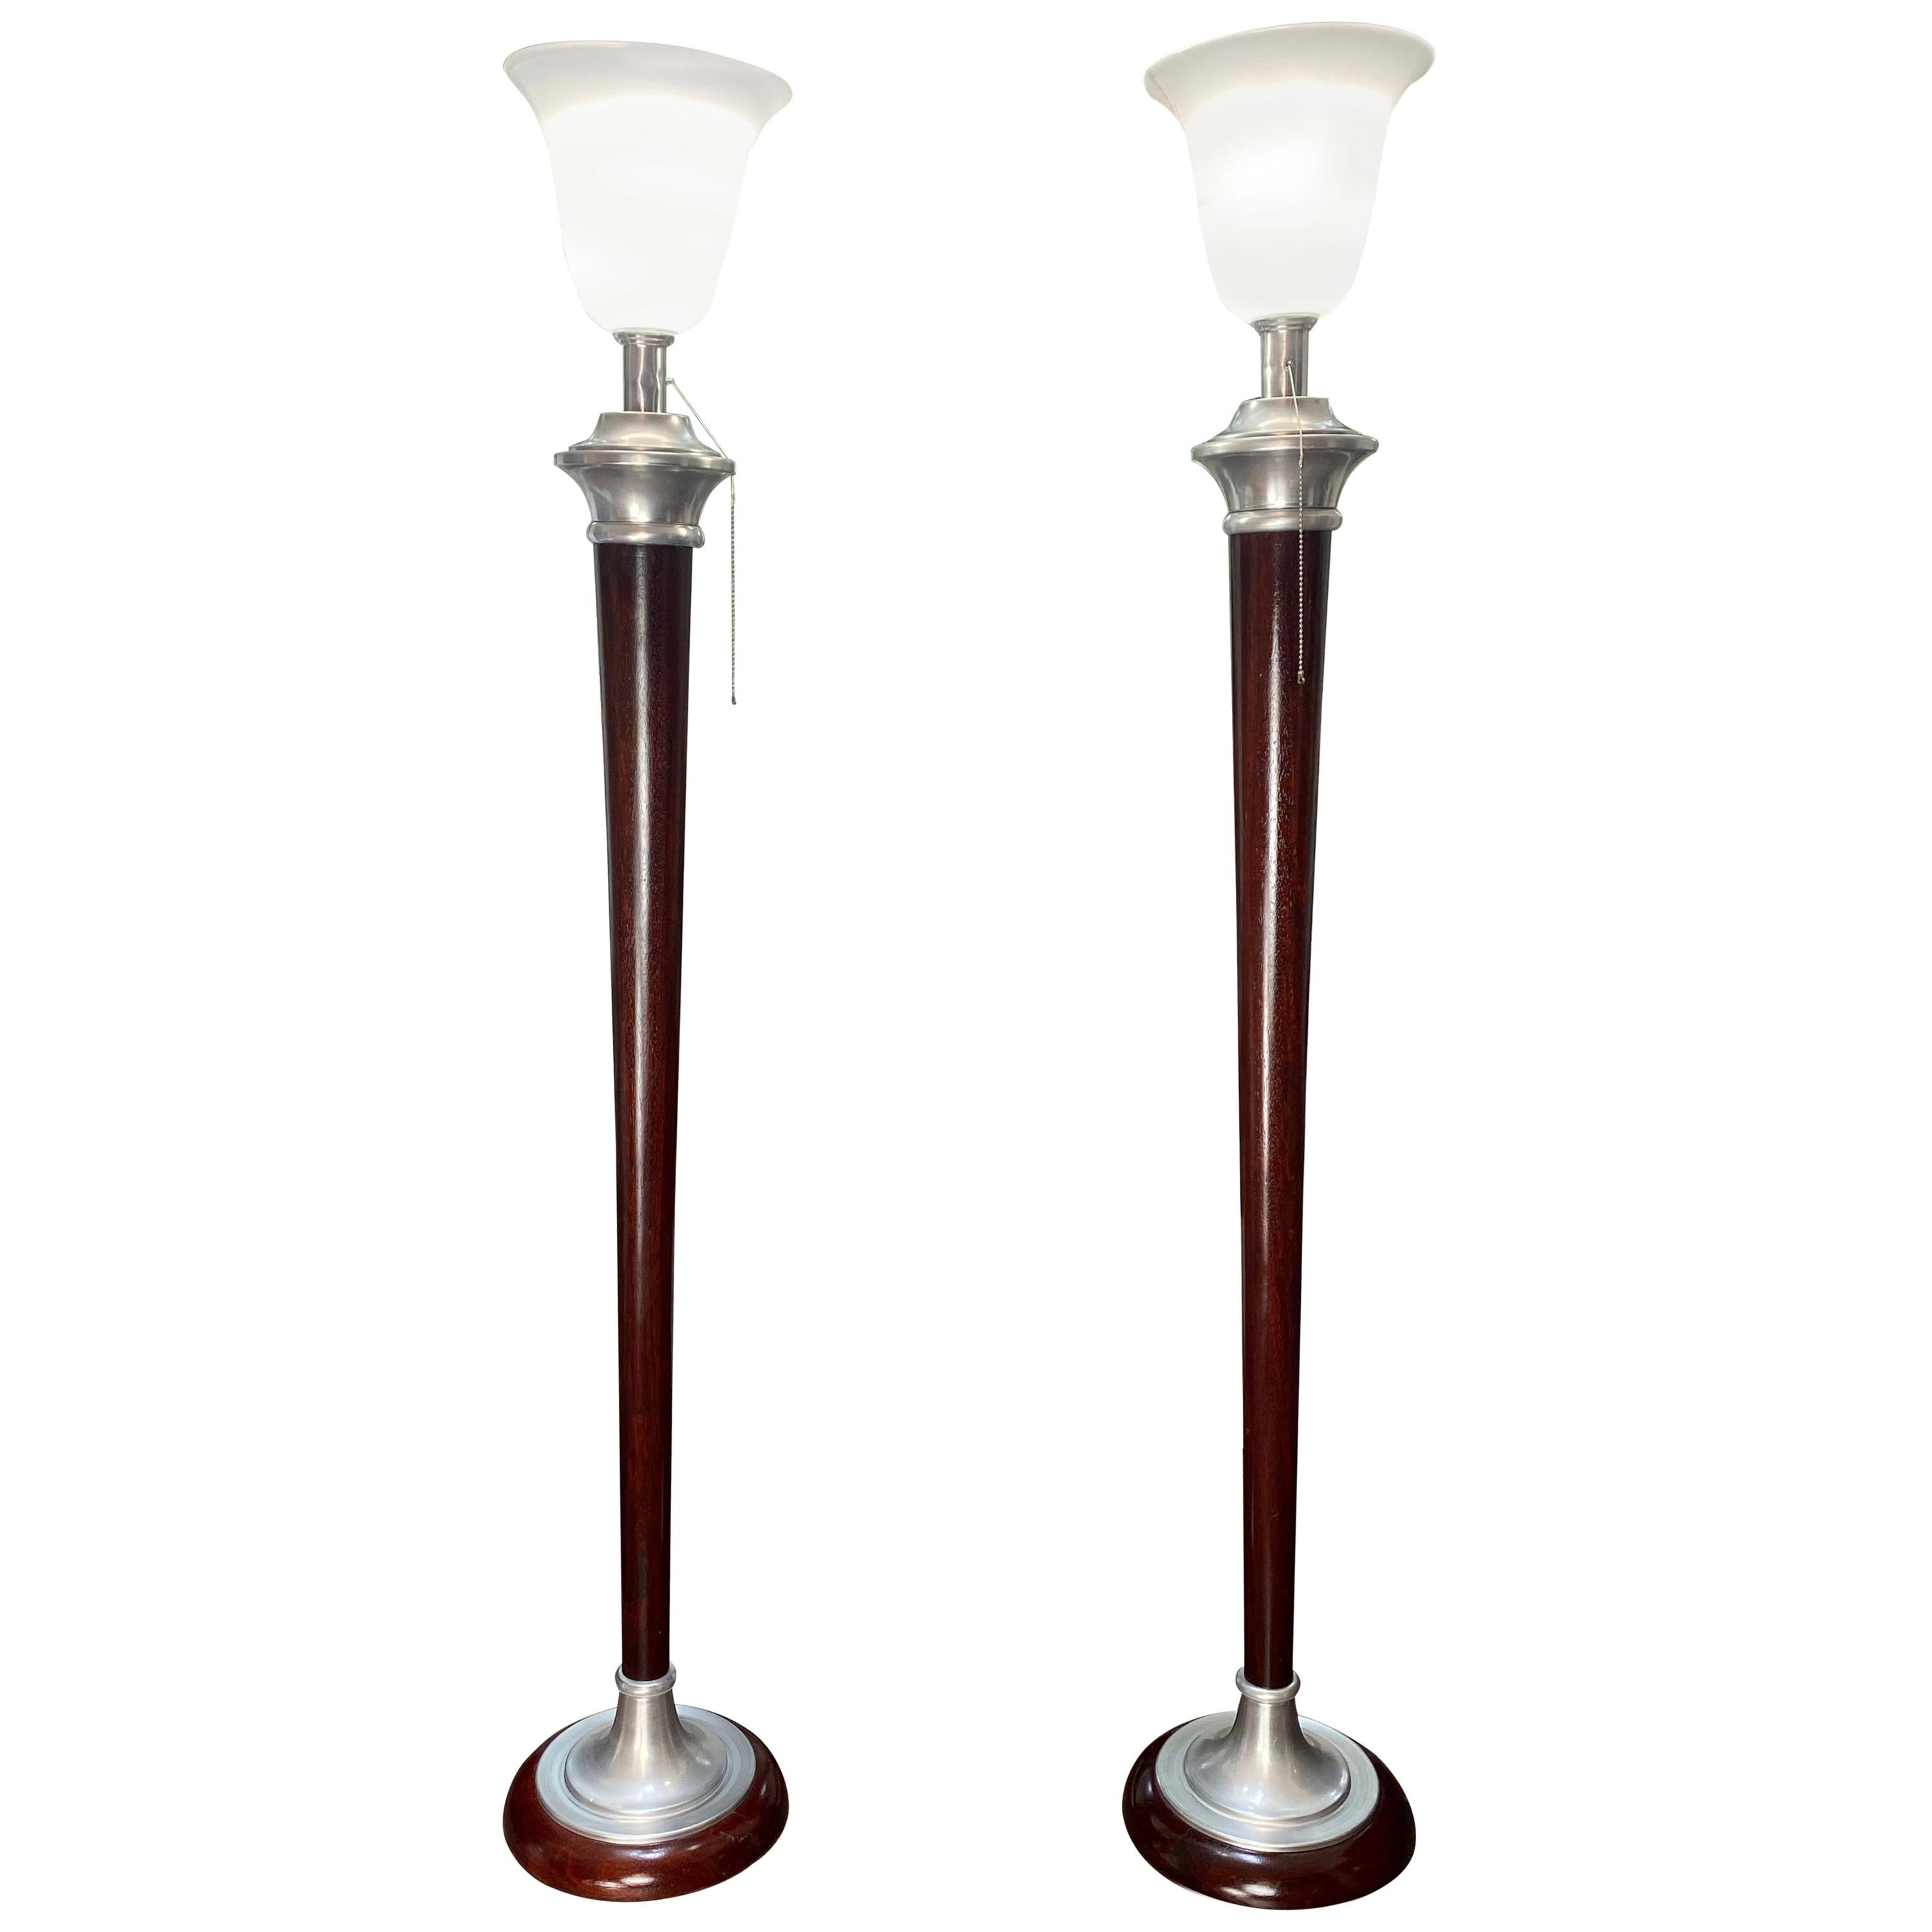 1930s Art Deco Mazda Floor Lamps with Original Stamp, Pair of Torchiere Lamps